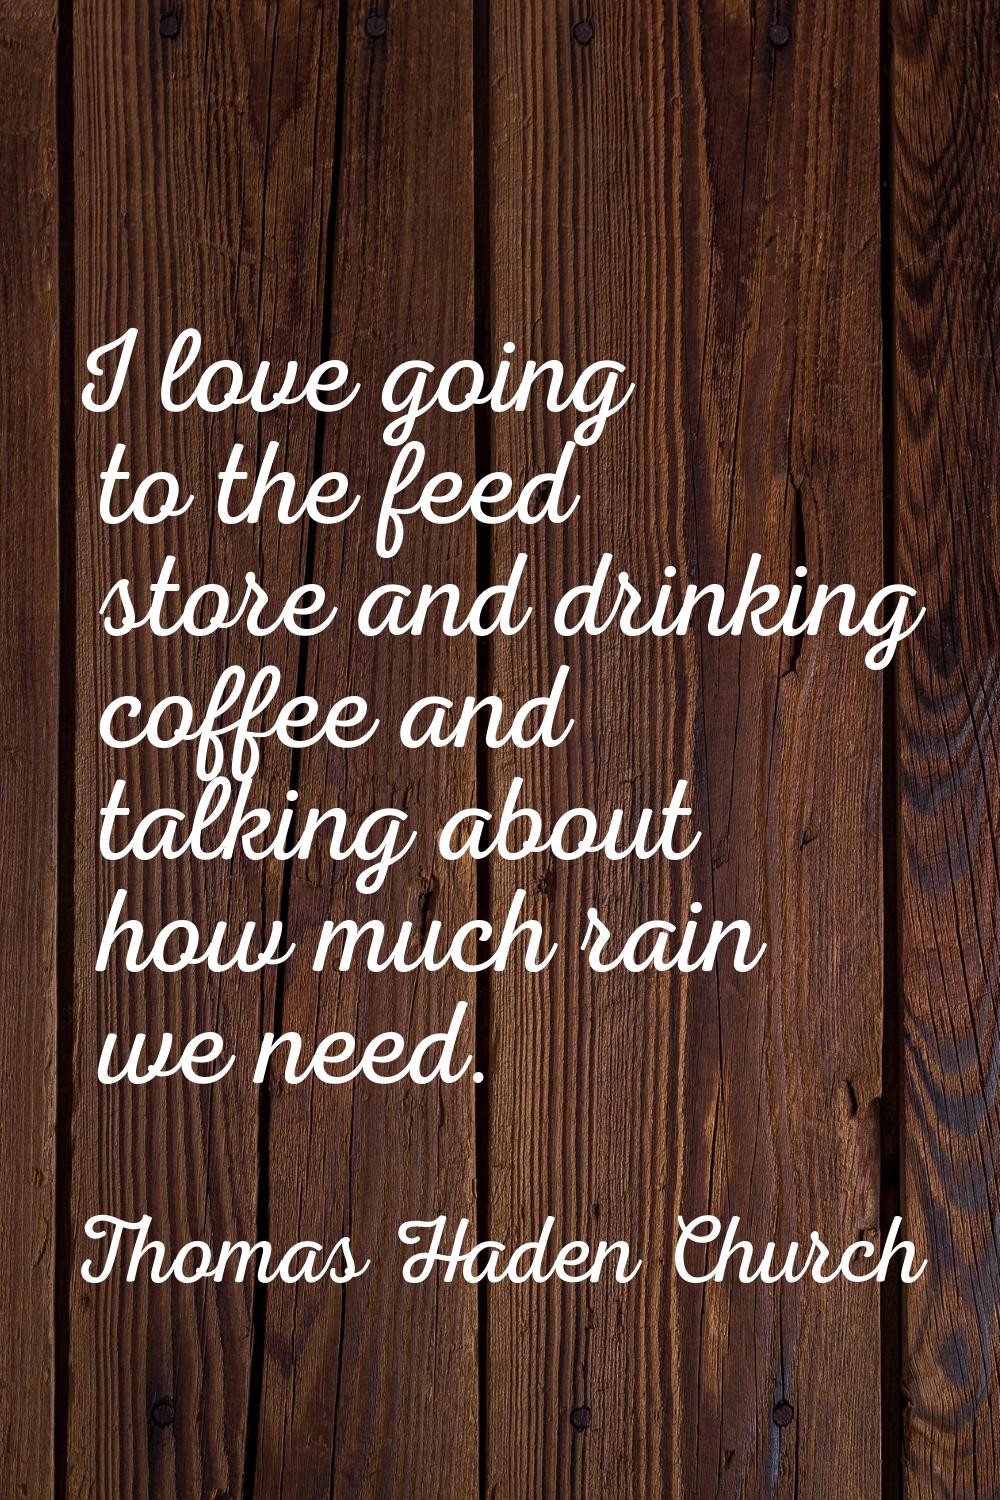 I love going to the feed store and drinking coffee and talking about how much rain we need.